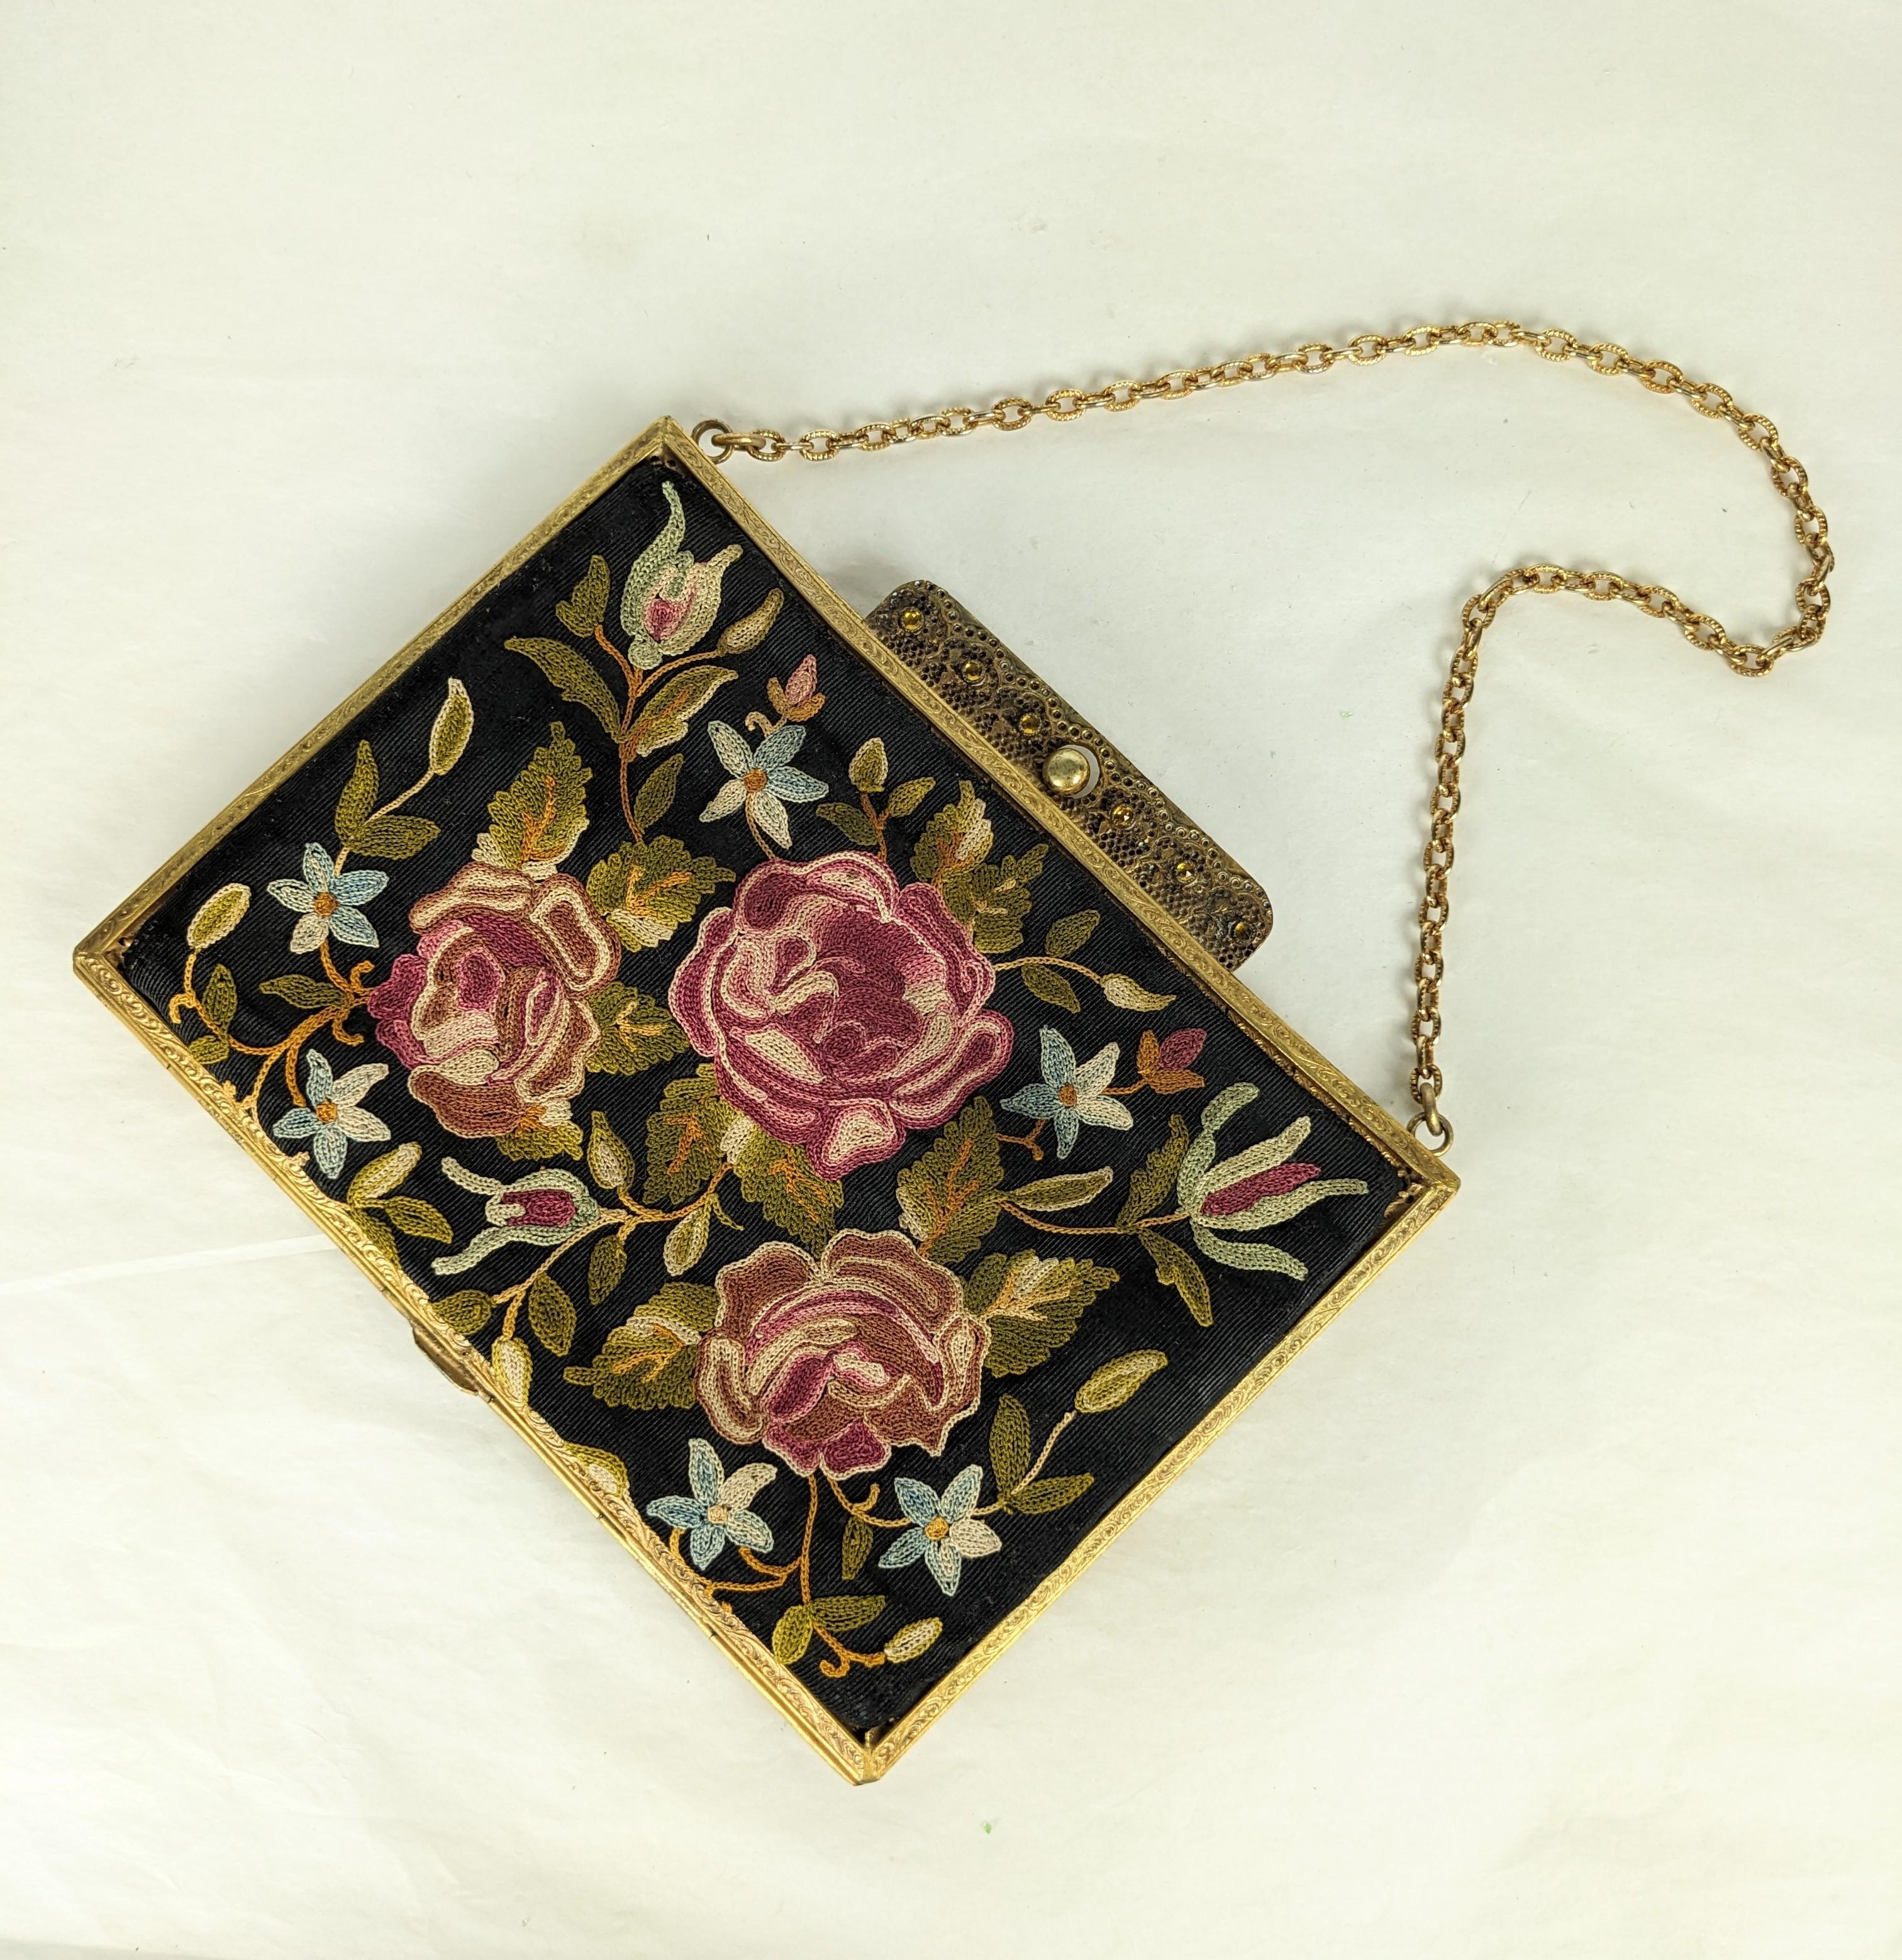 Lovely Edwardian Beauvais Embroidered Bag from the turn of the 20th century in France.  Lavishly hand embroidered with roses on black silk faille within a bronze frame set with a citrine crystal clasp. Silk lining with compartments. 1910 France.